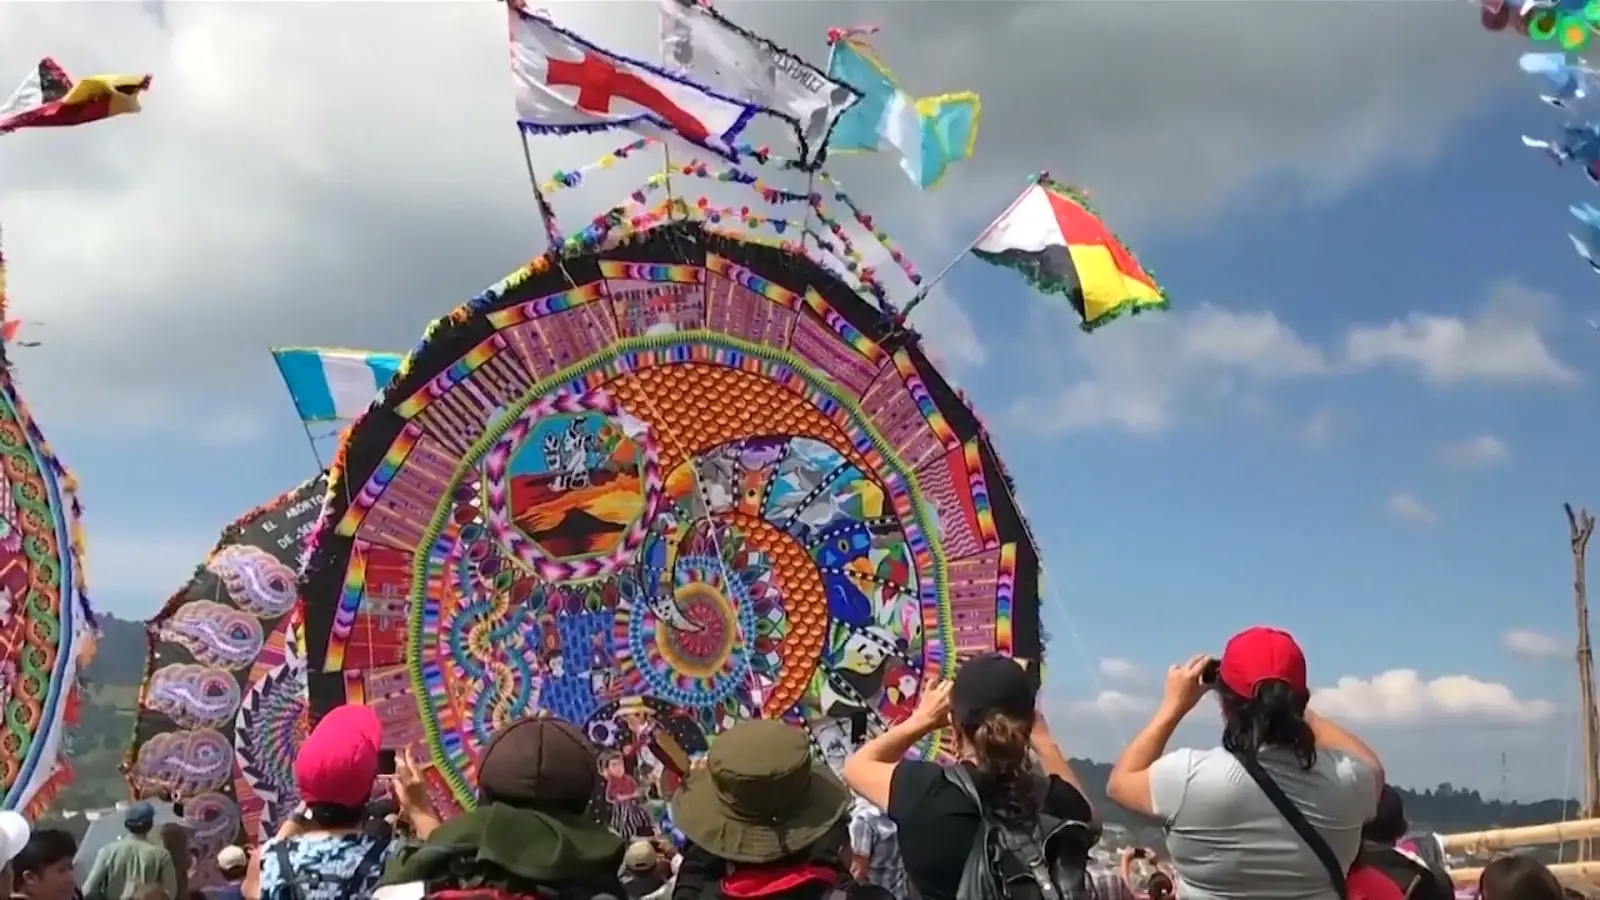 Giant bright multicolor circular/octogonal woven kite with neon fringed flags flapping in the wind. One flag is the Guatemalan flag. Other giant kites are visible near it.